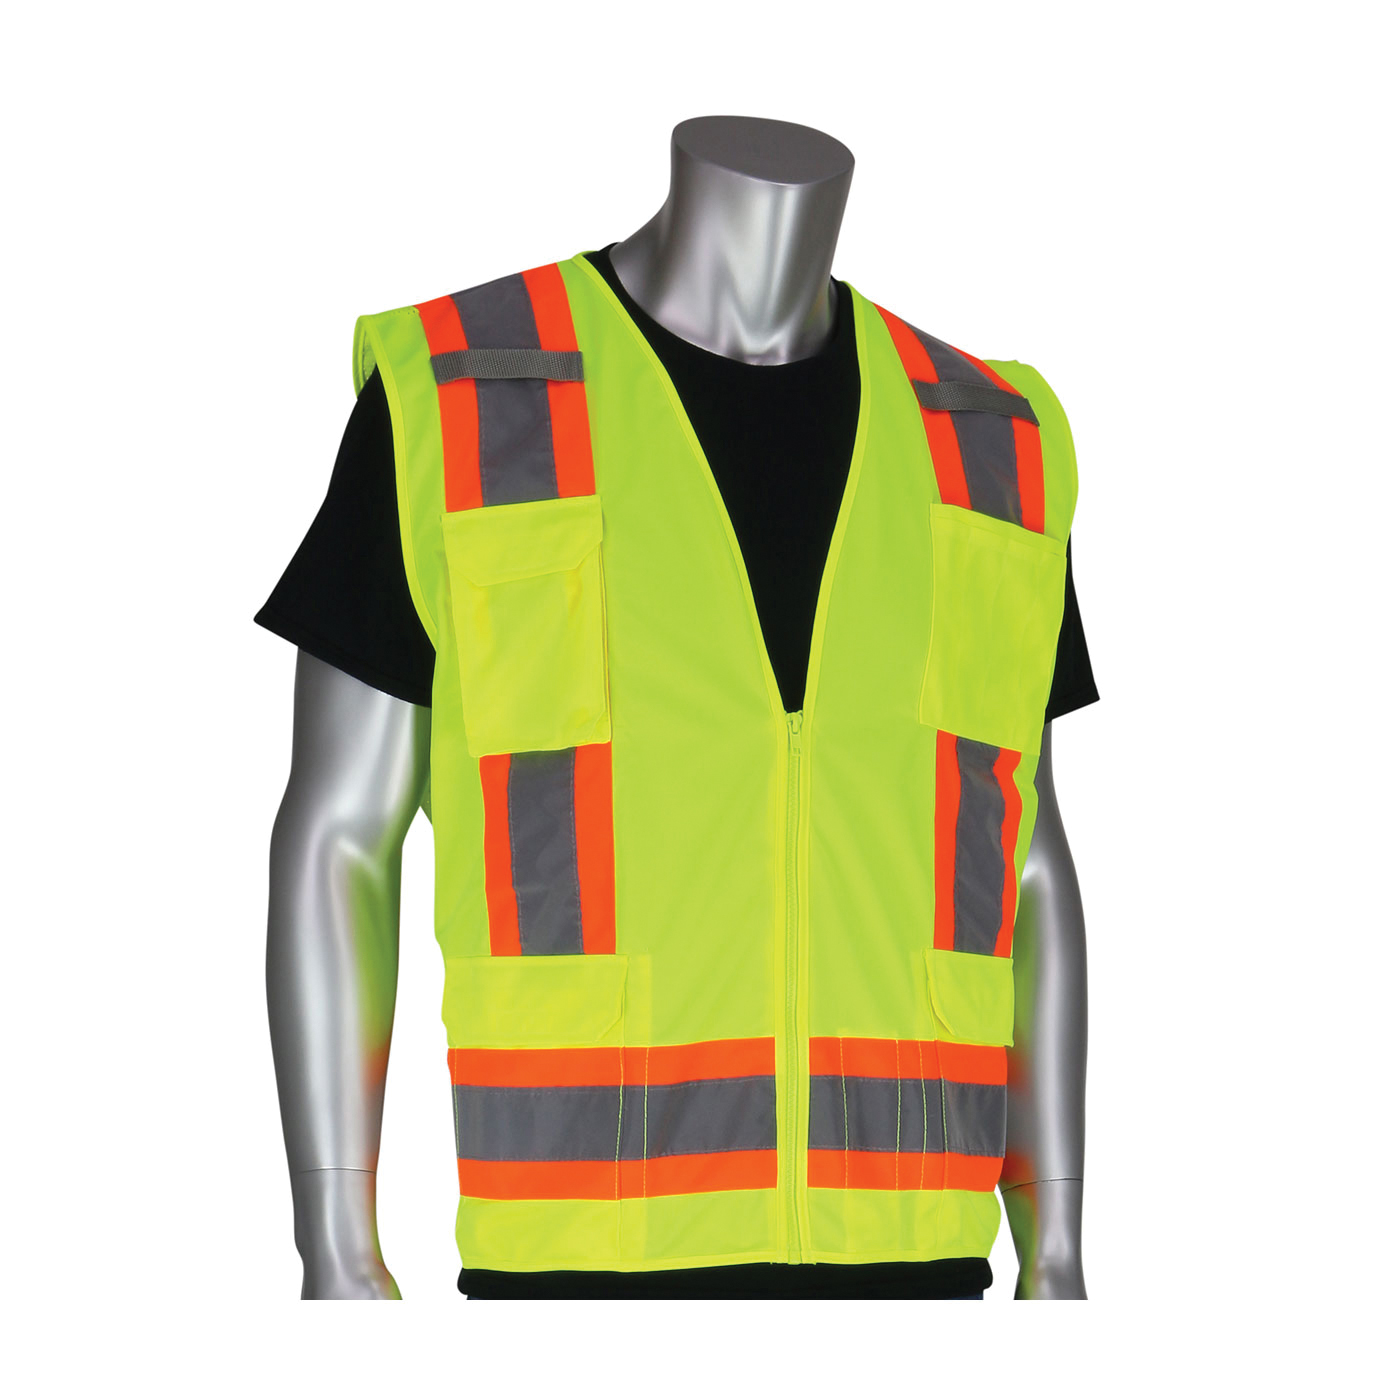 PIP® 302-0500S-YEL/S 2-Tone Surveyor Safety Vest, S, Hi-Viz Lime Yellow, Polyester/Solid Tricot, Zipper Closure, 11 Pockets, ANSI Class: Class 2, Specifications Met: ANSI 107 Type R